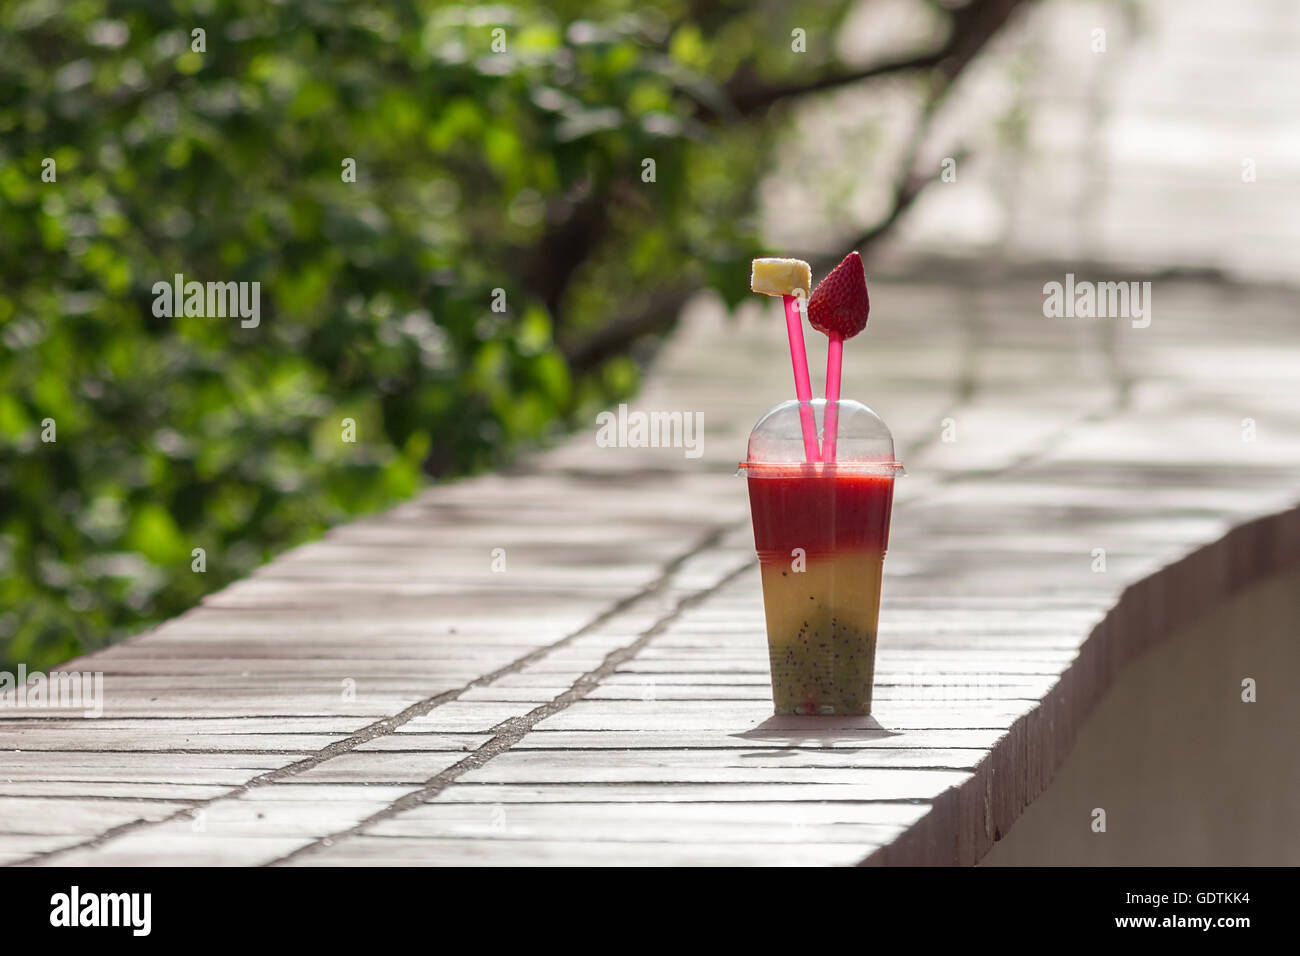 Summer fruit drink in the hot sunny city Stock Photo